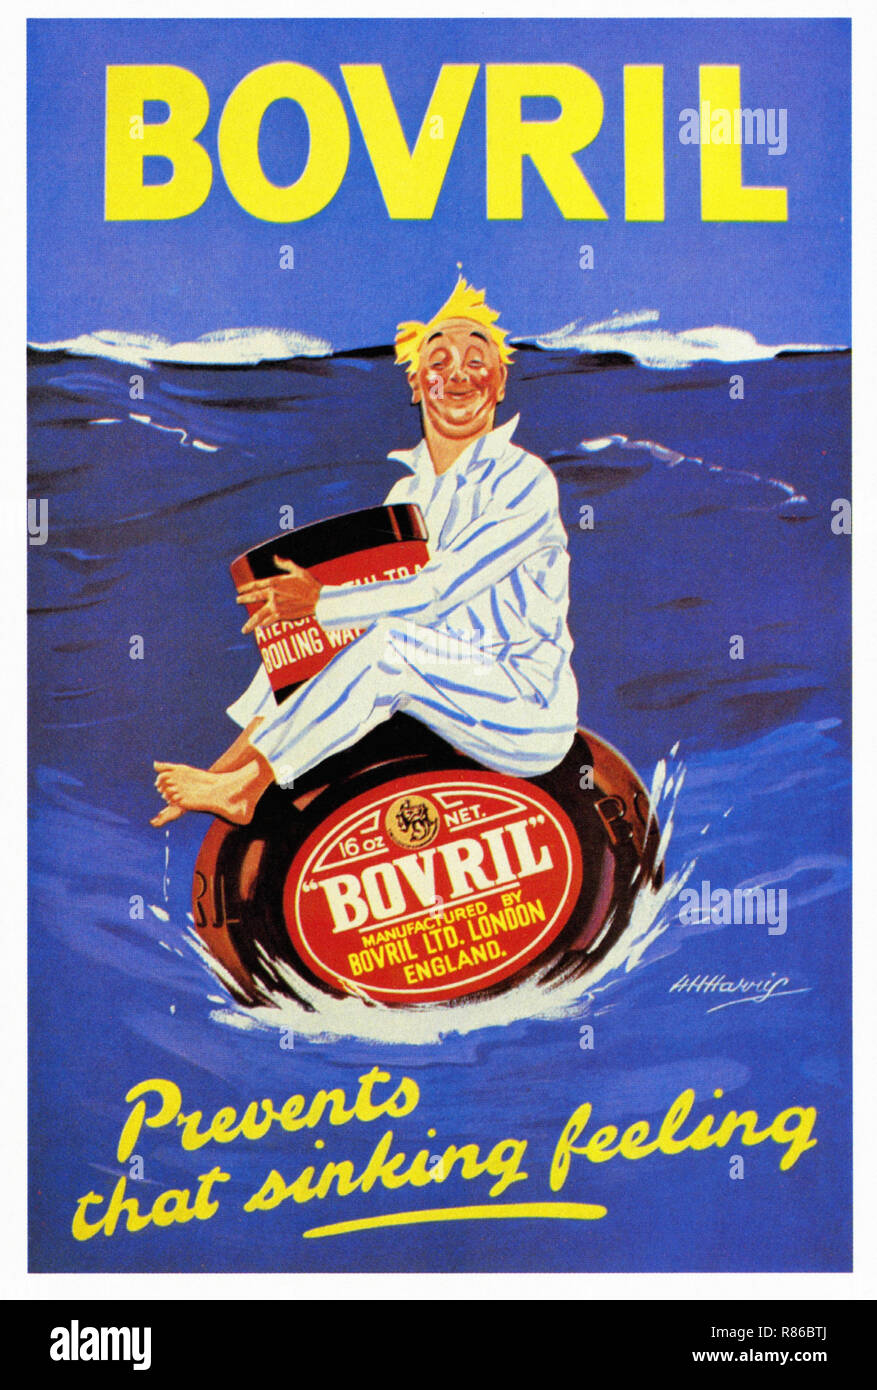 Bovril Prevents That Sinking Feeling - Vintage advertising poster Stock Photo